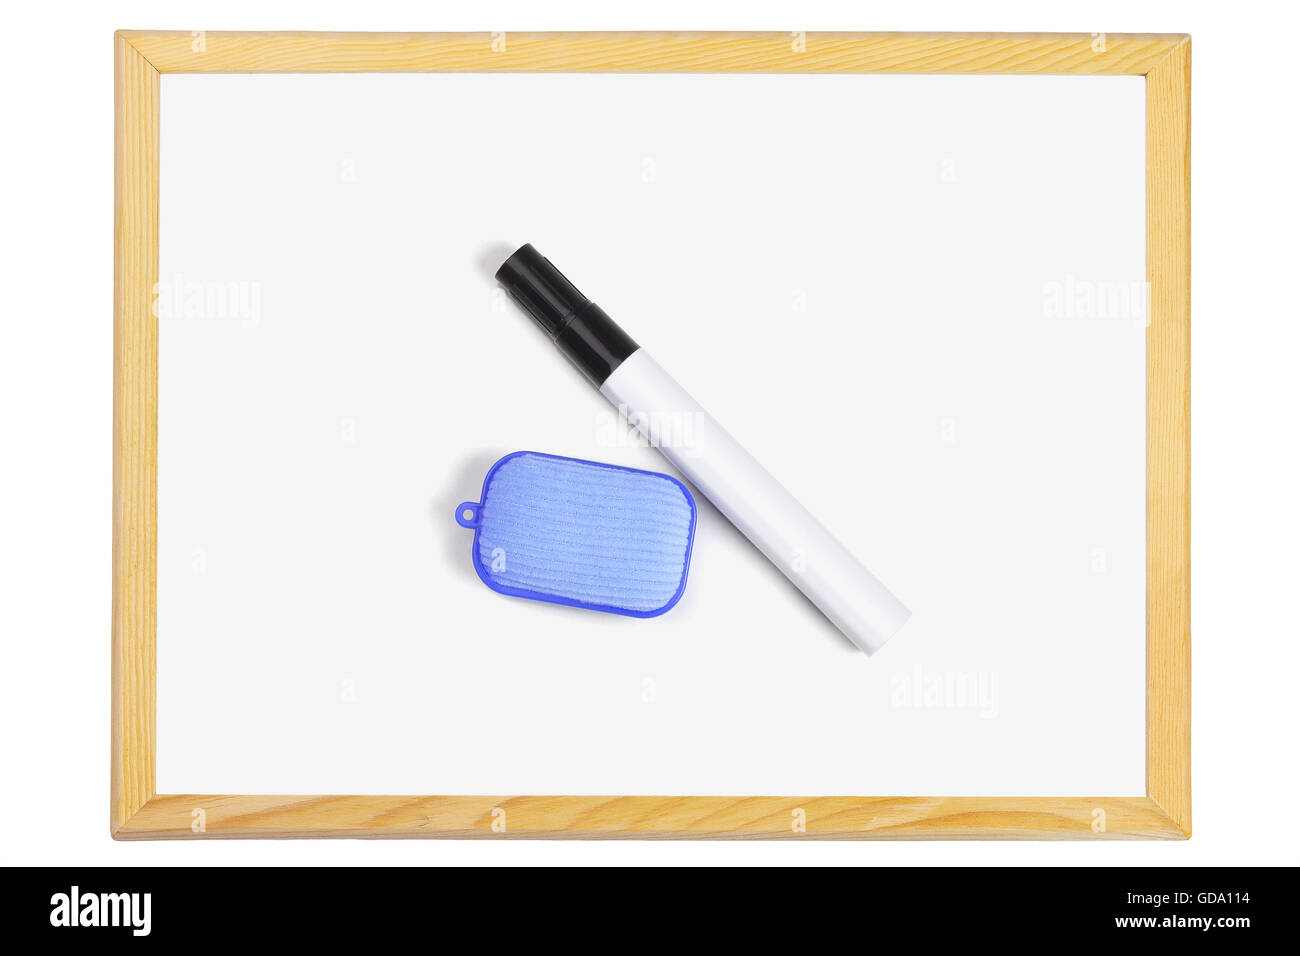 Marker Pen and Eraser Lying on Small White Board Stock Photo